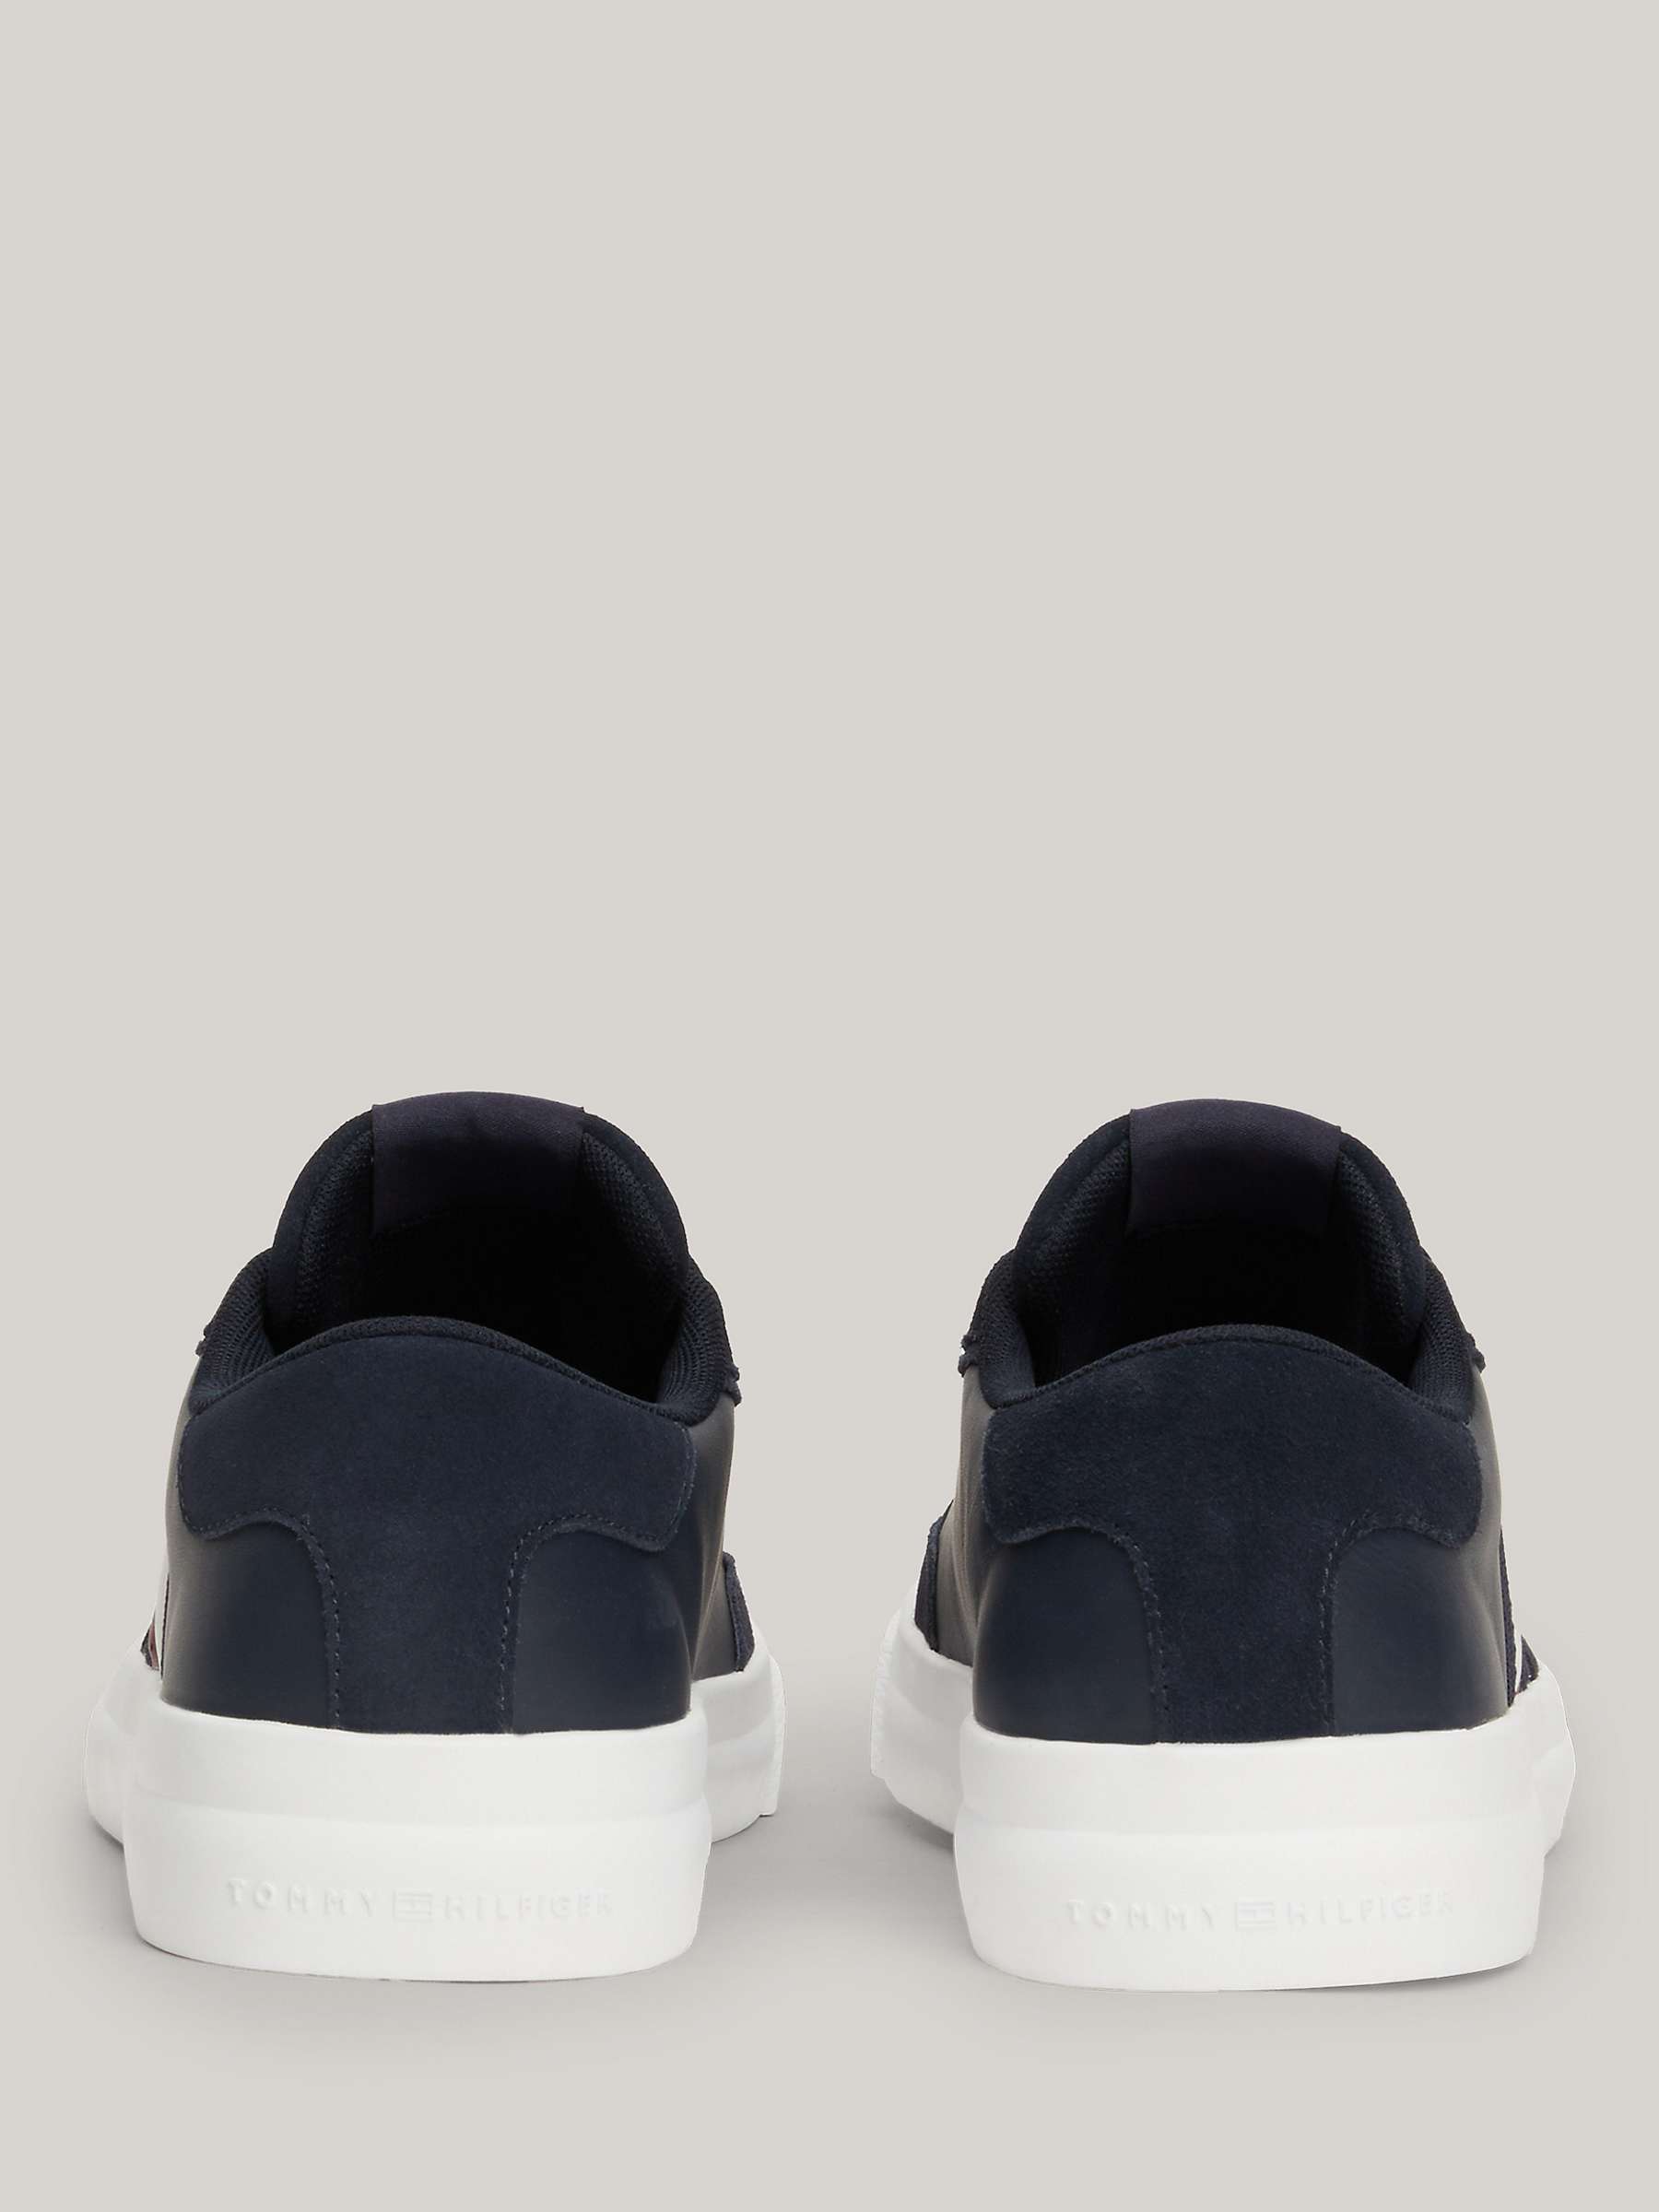 Buy Tommy Hilfiger Cupsole Leather Trainers, Desert Sky Online at johnlewis.com